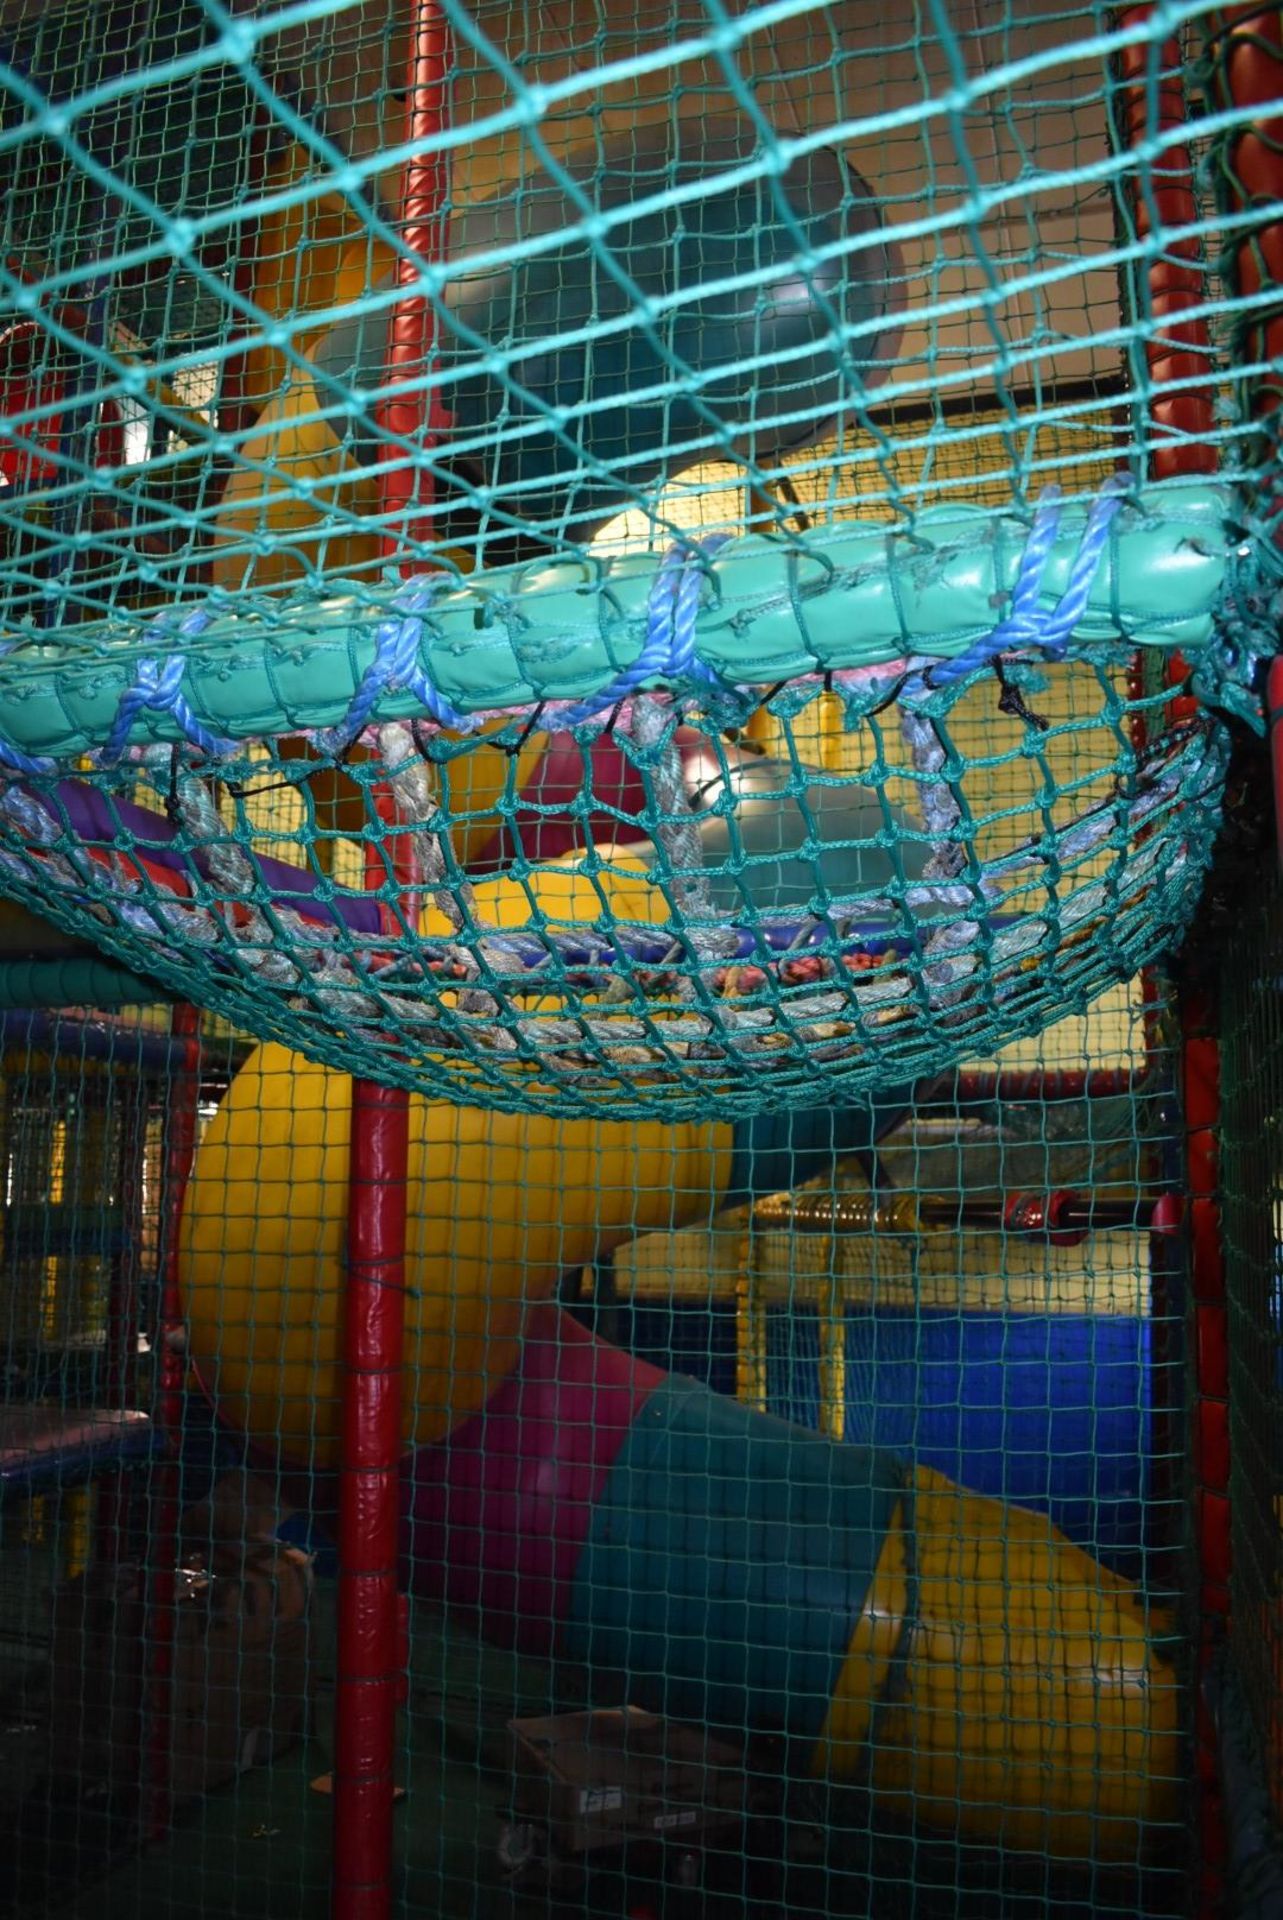 Bramleys Big Adventure Playground - Giant Action-Packed Playcentre With Slides, Zip Line Swings, - Image 82 of 128